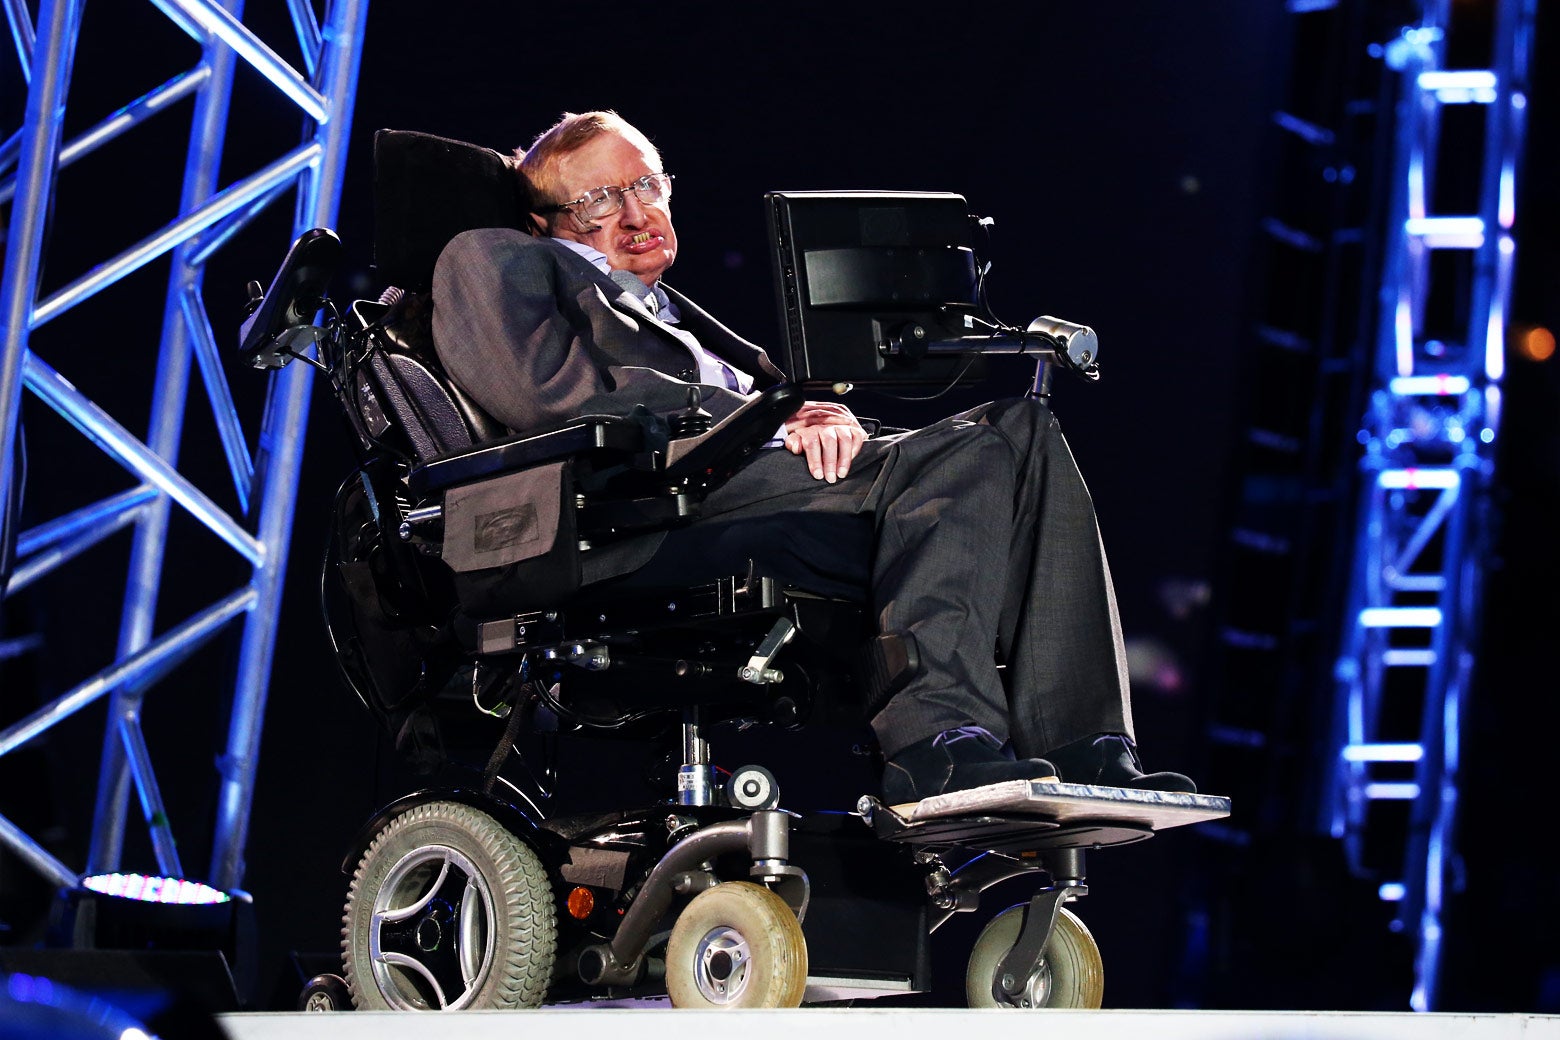 Stephen Hawking’s collaborations with machines helped him reclaim his